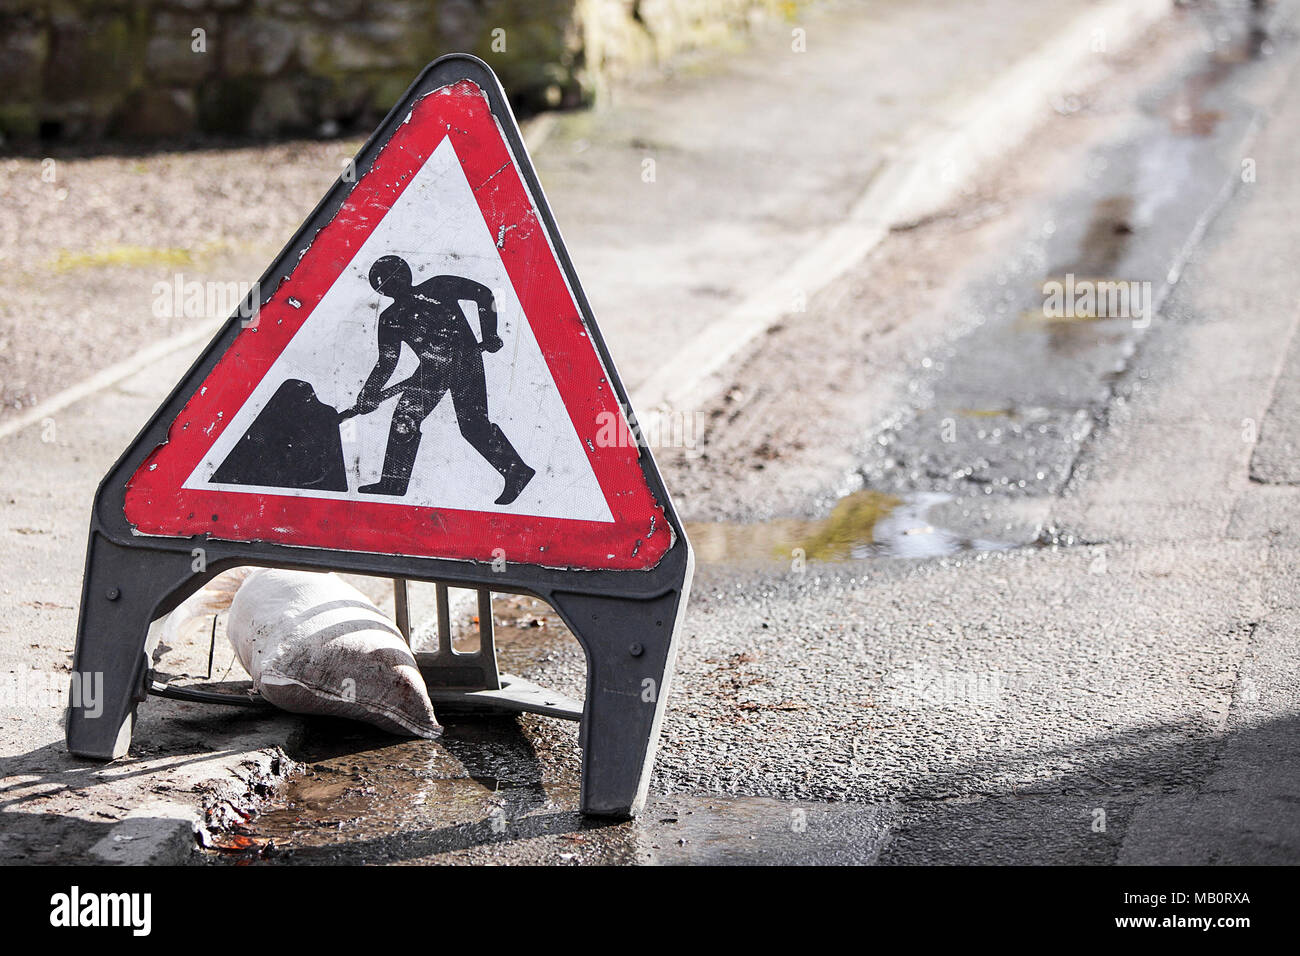 Roadworks signage related to health and safety regulations, viewed here in Acton Burnell, Shrewsbury, England. Stock Photo